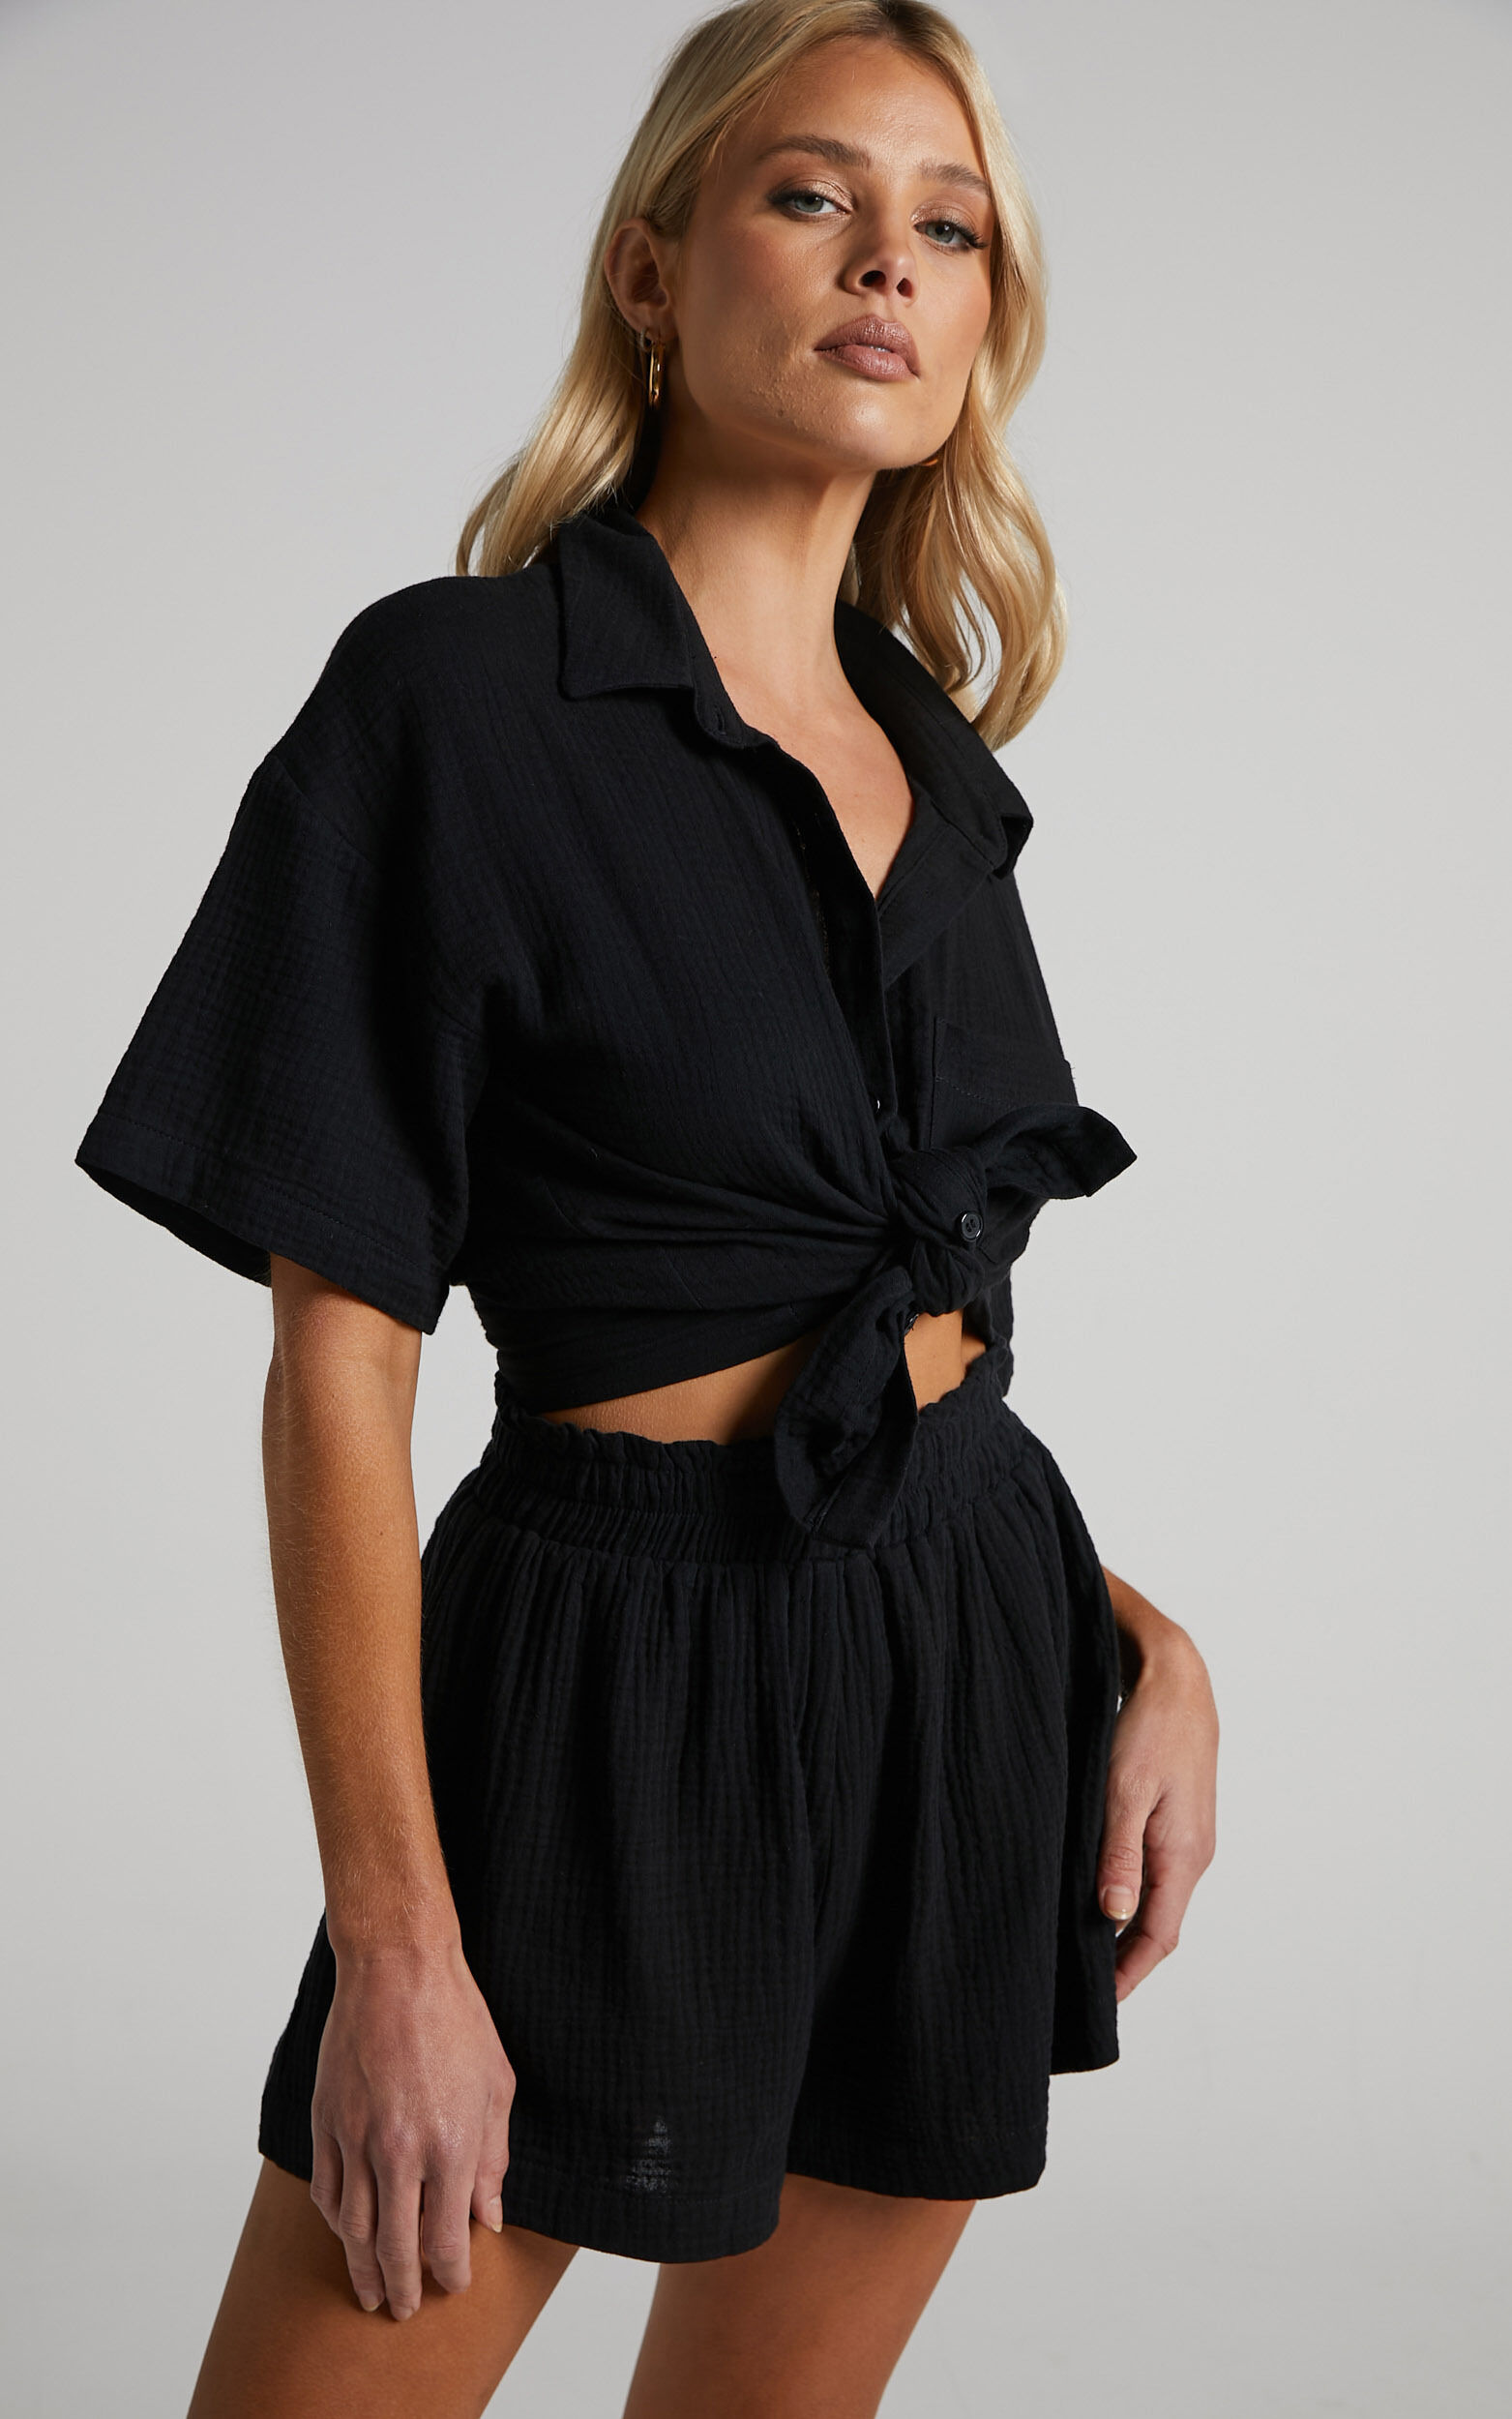 Donita Top - Button Up Shirt Top in Black - 04, BLK1